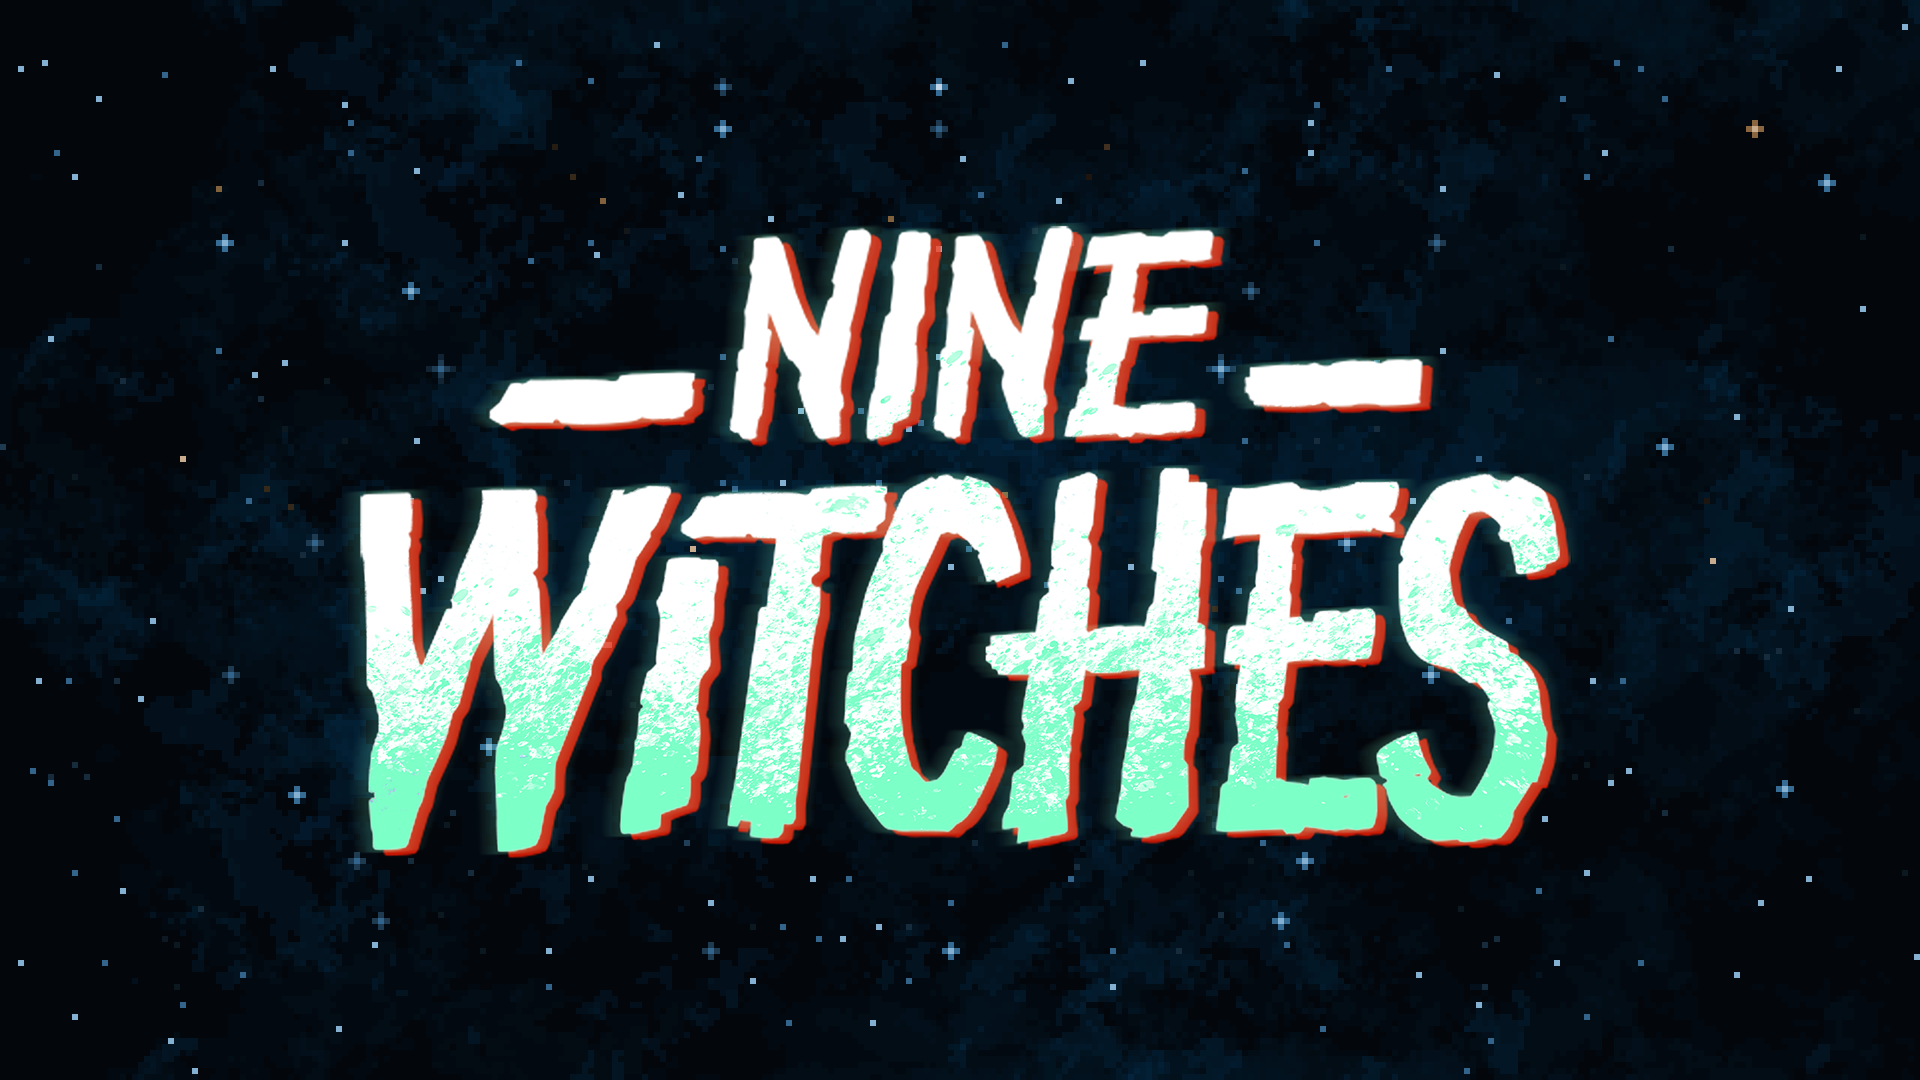 Icon for Nine Witches